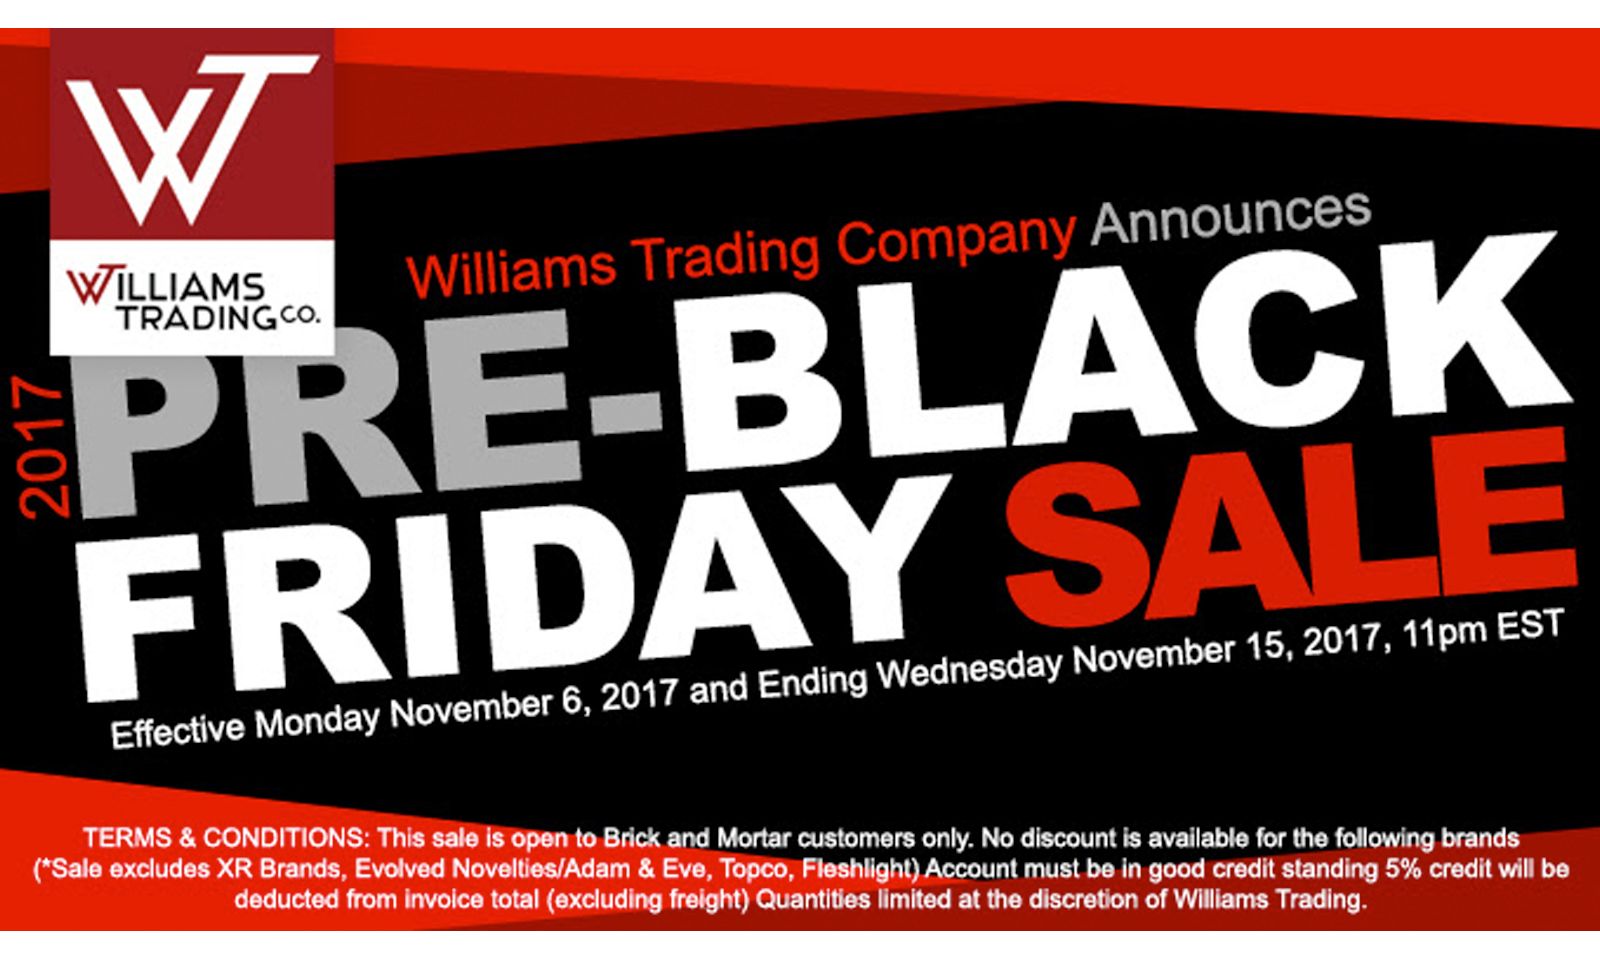 Williams Trading Holding Pre-Black Friday Warehouse Sale